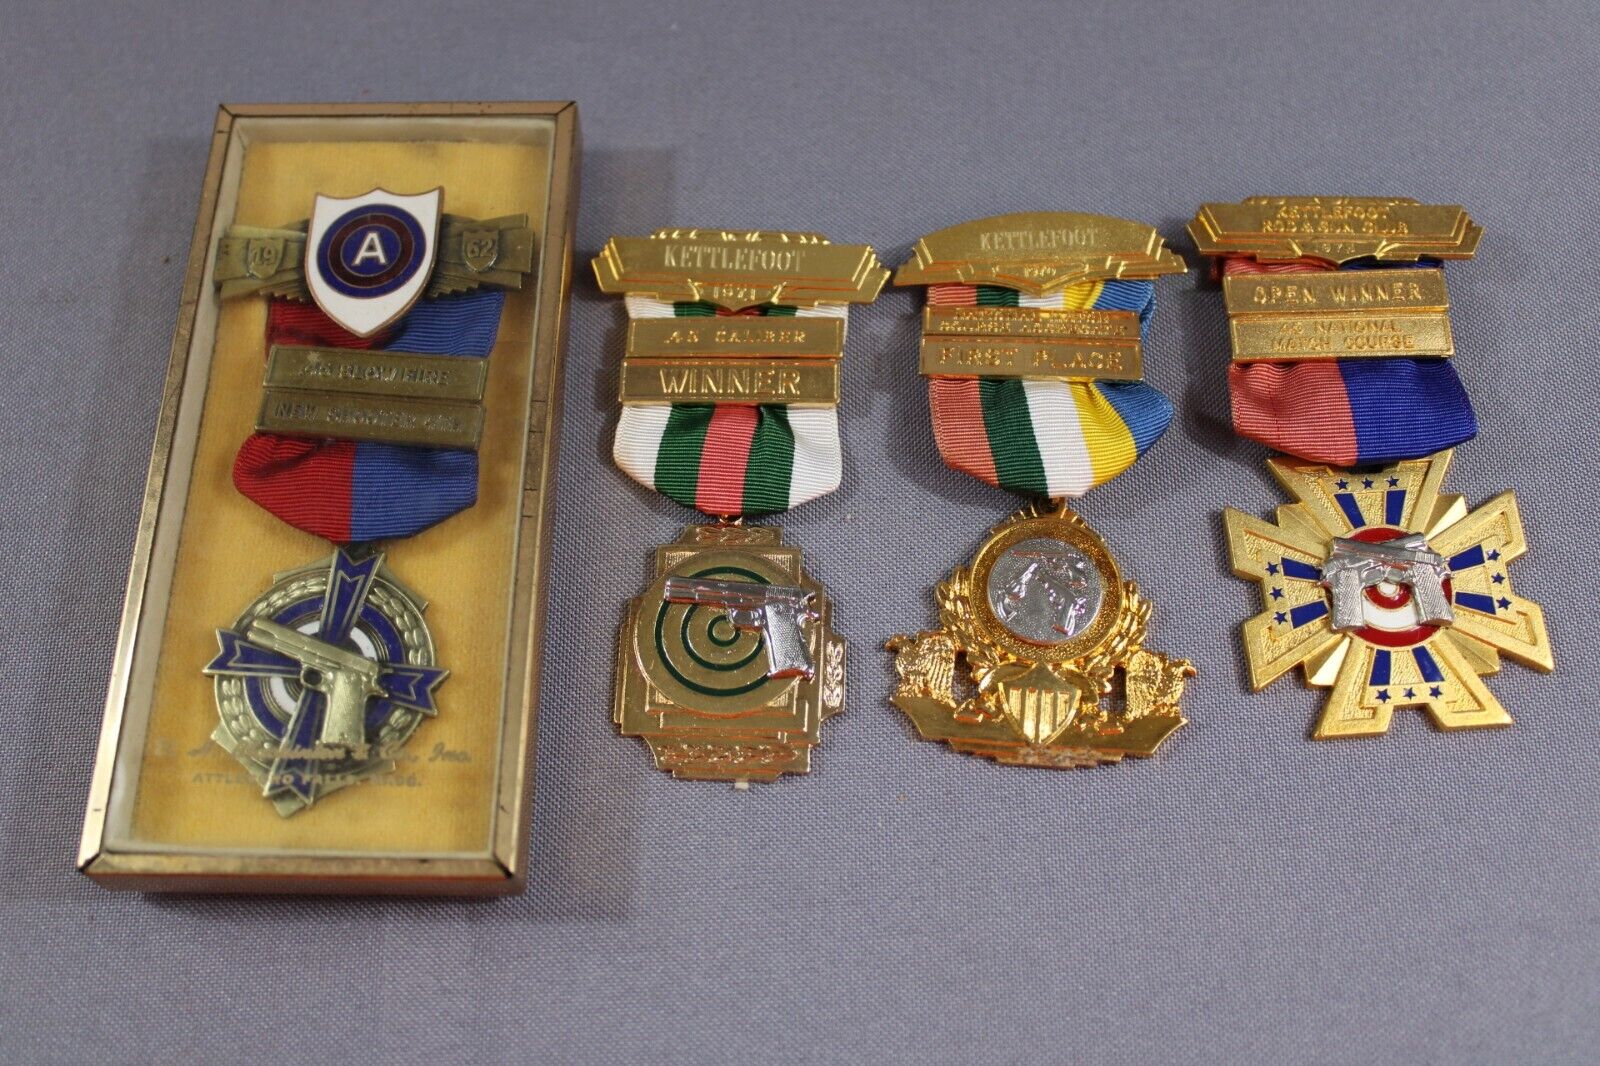 Lot x4 1911 Pistol Shooting Competition Medals 3rd US Army 1962 1970 1971 1972